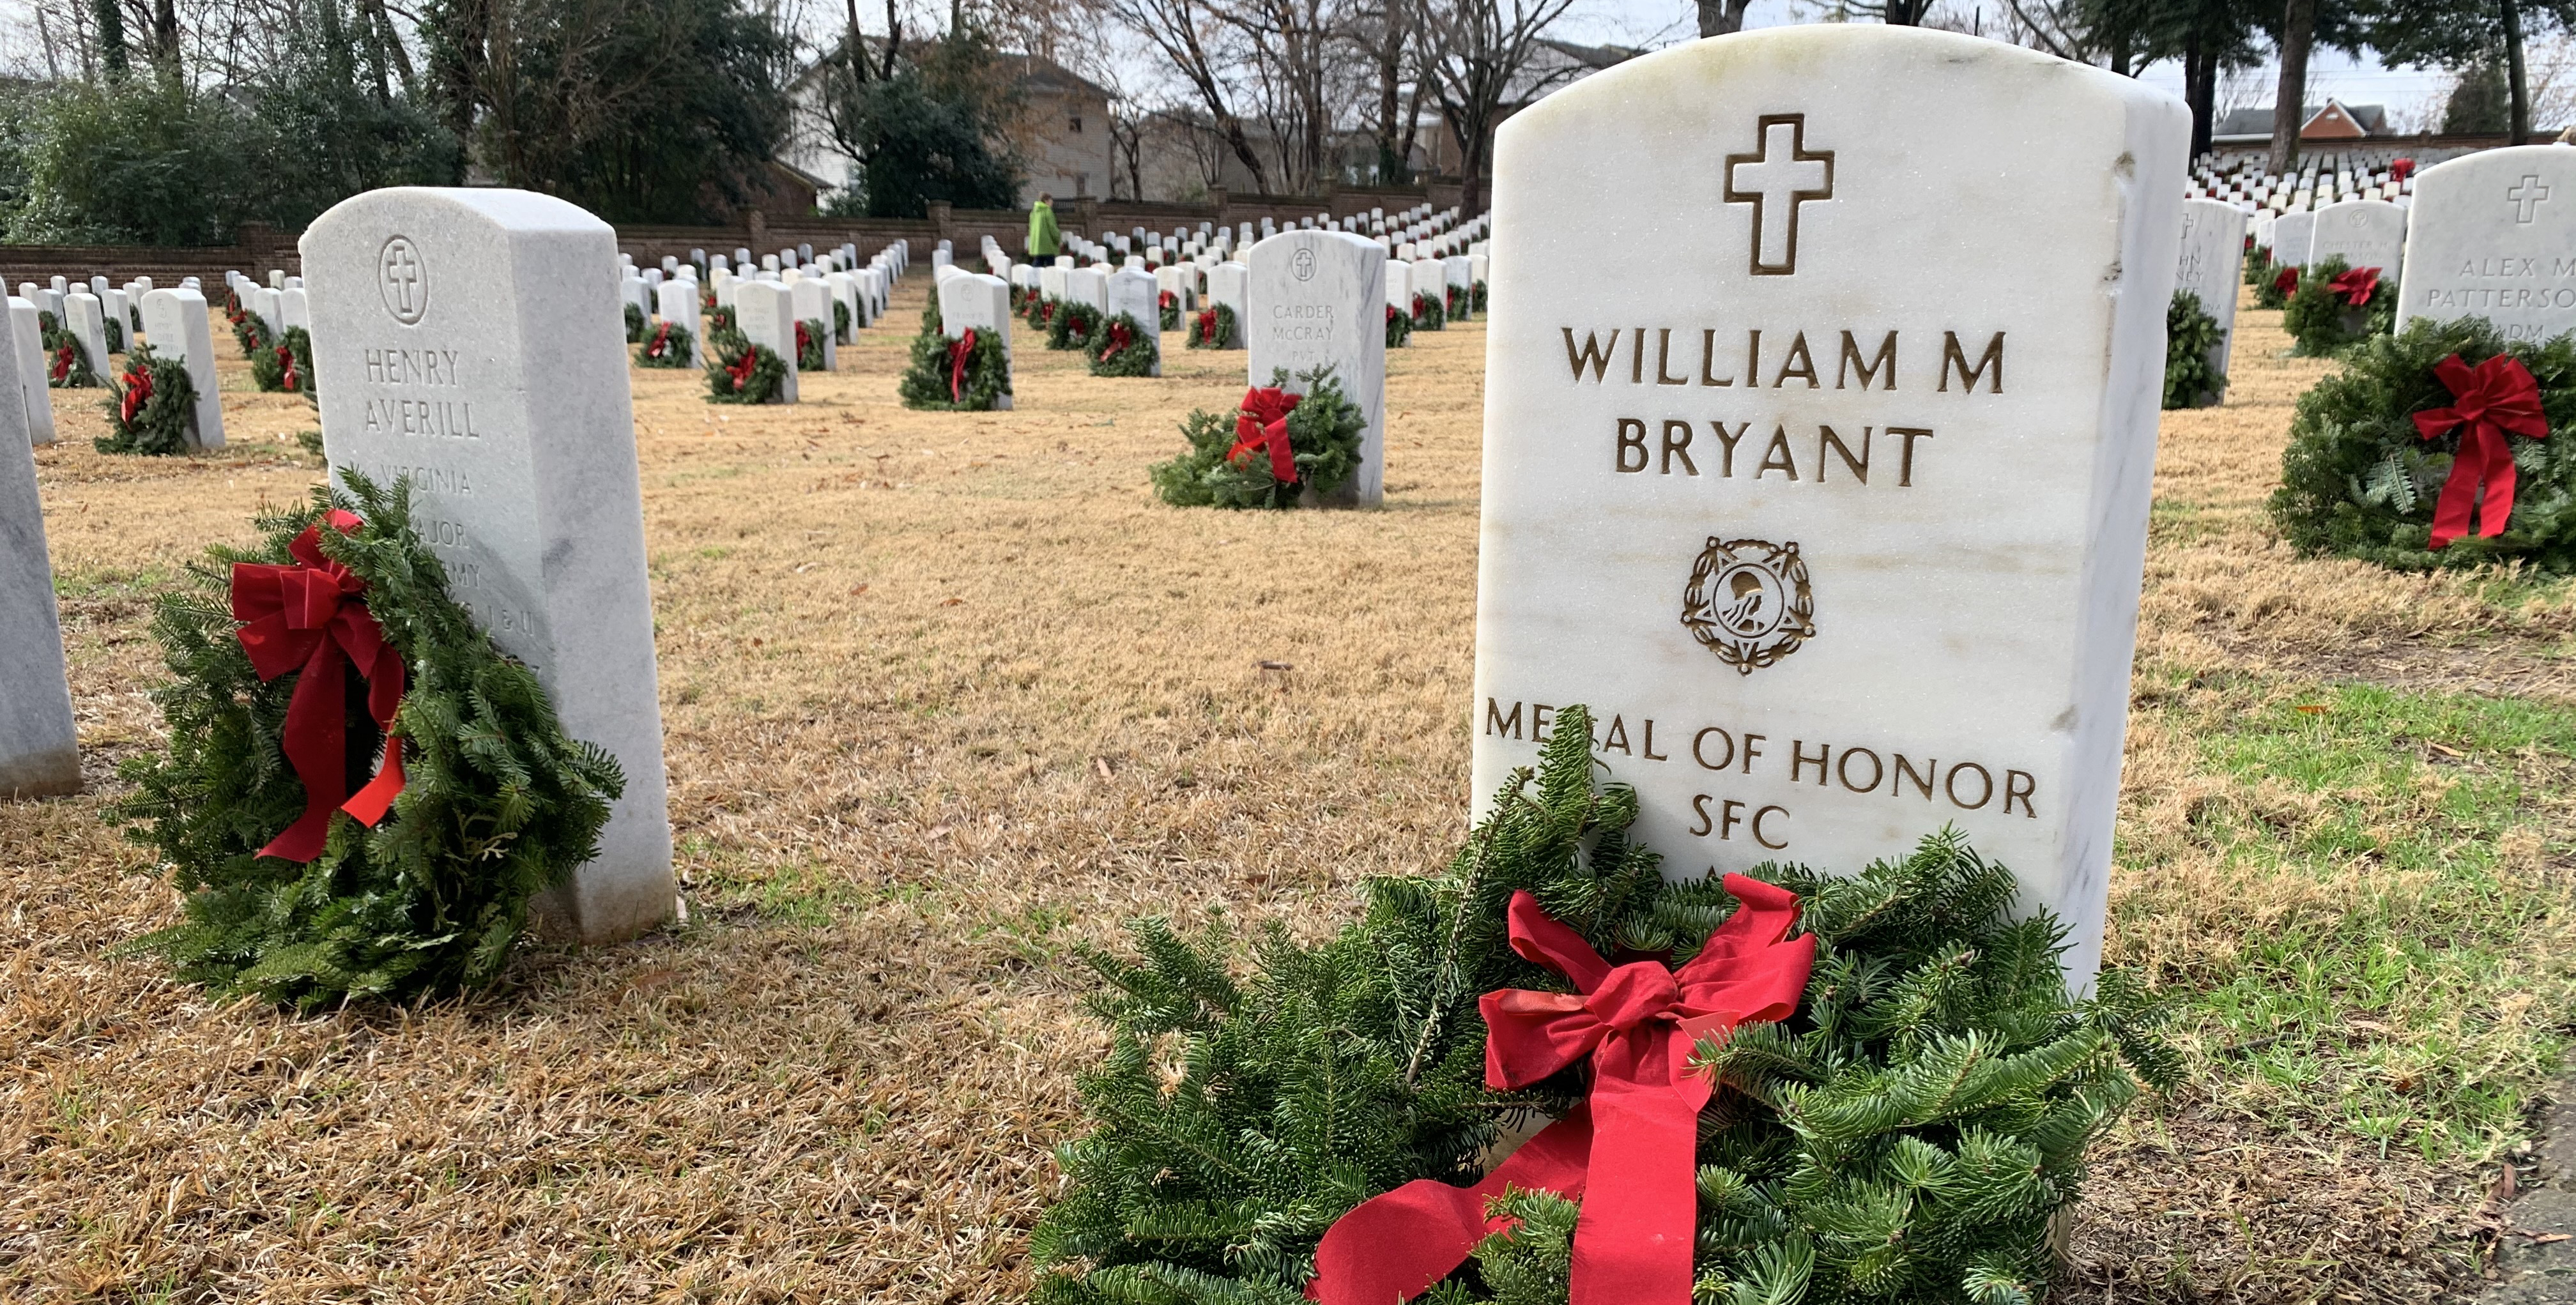 A wreath lies at the grave of Army Sgt. 1st Class William M. Bryant during the 2019 Wreaths Across America event at Raleigh National Cemetery, North Carolina. VA photo by Adam Stump.